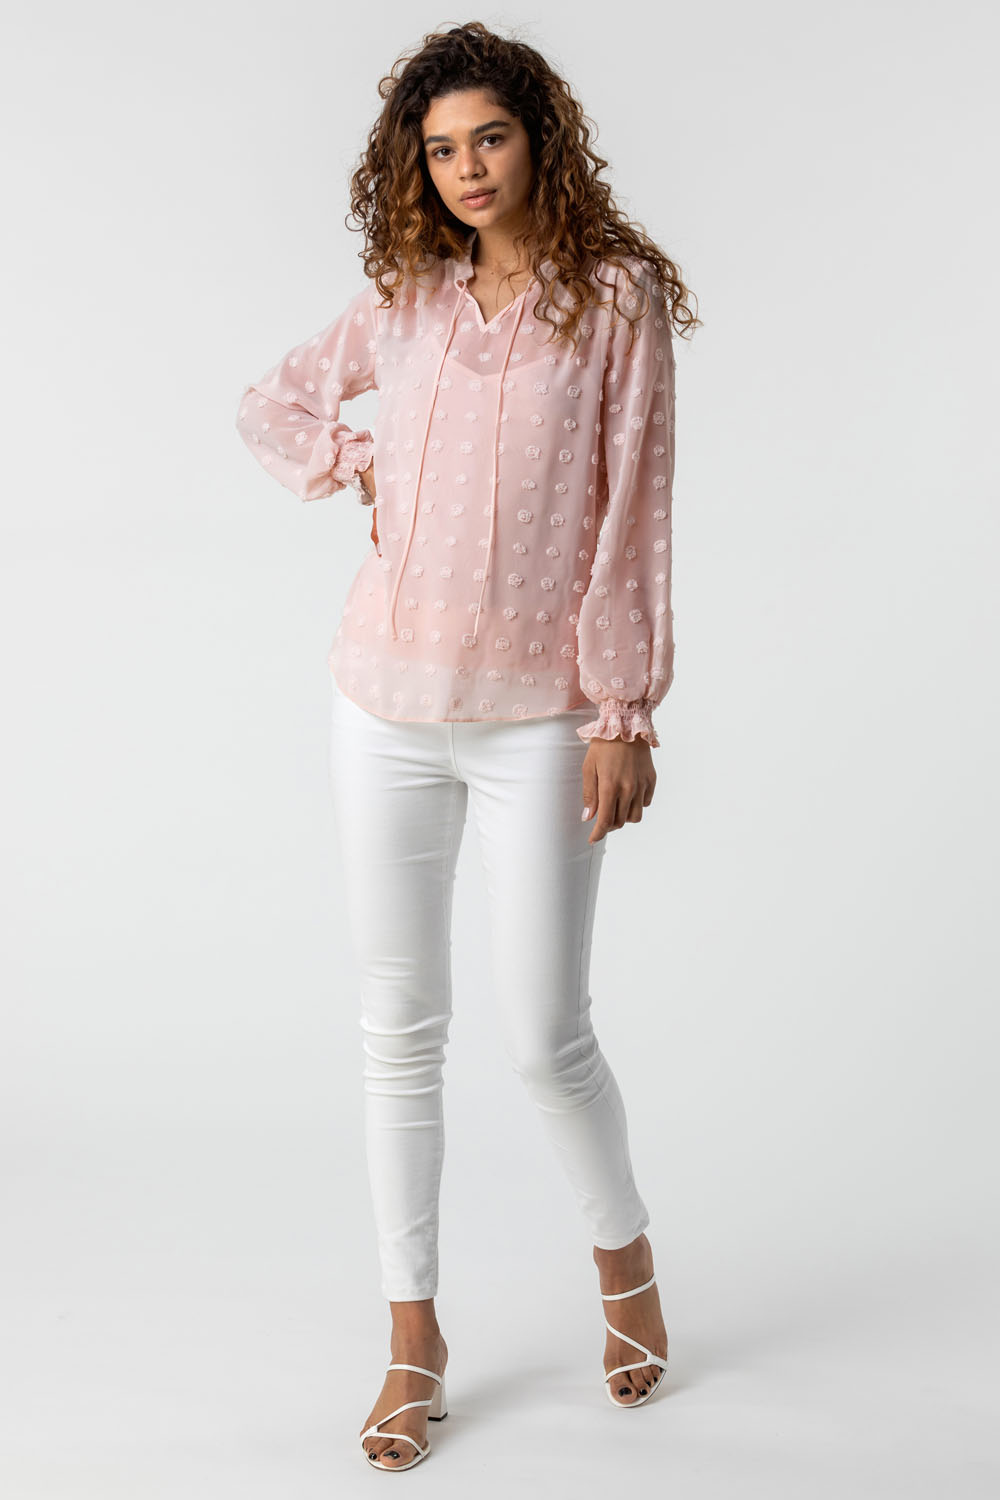 Light Pink Textured Spot Blouse with Cami Top, Image 3 of 4